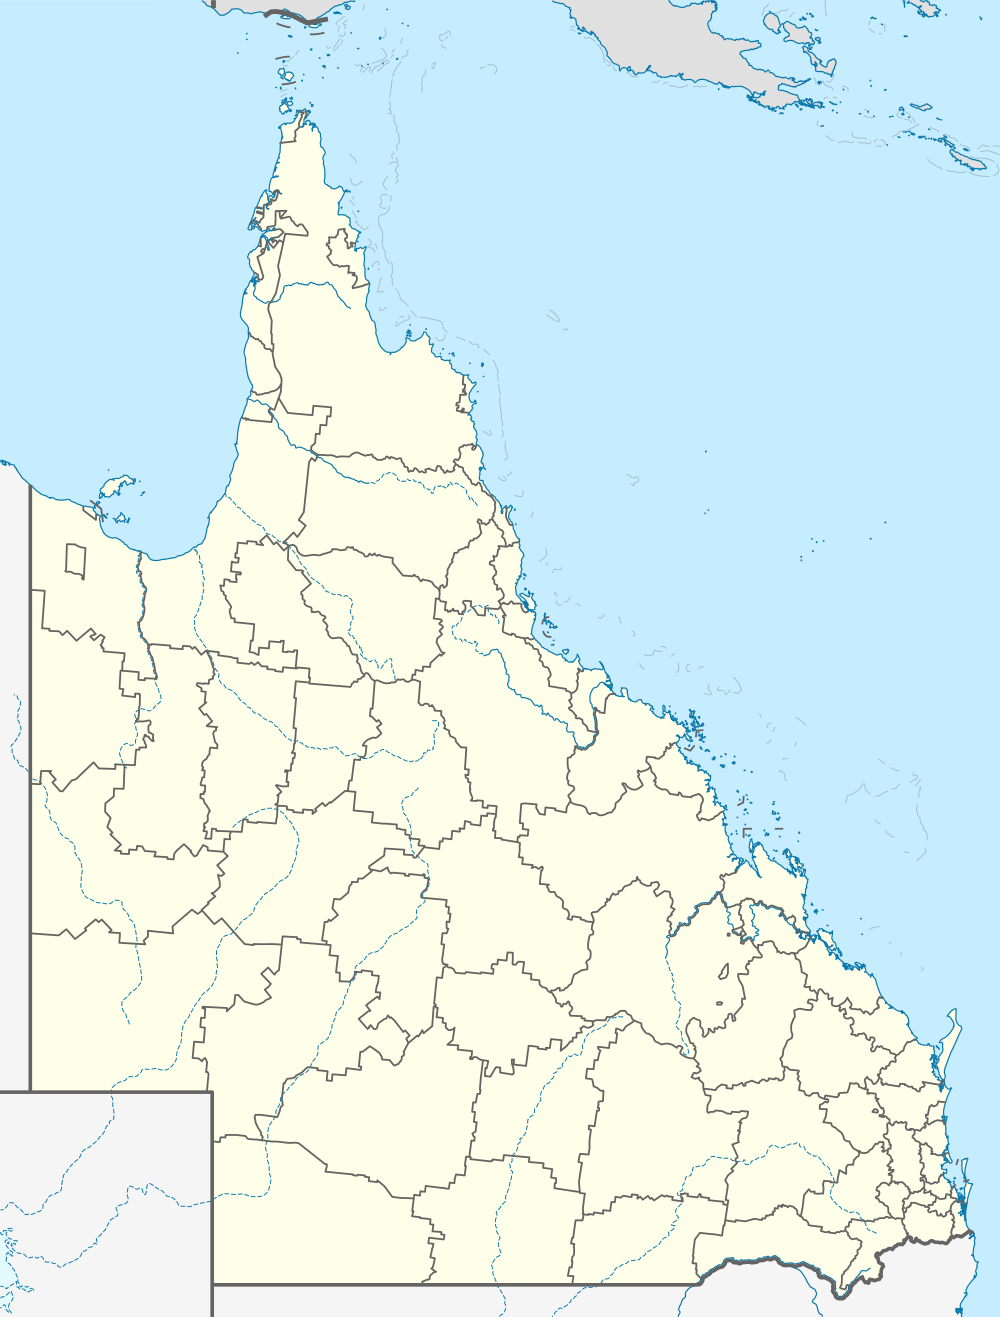 List of power stations in Queensland is located in Queensland